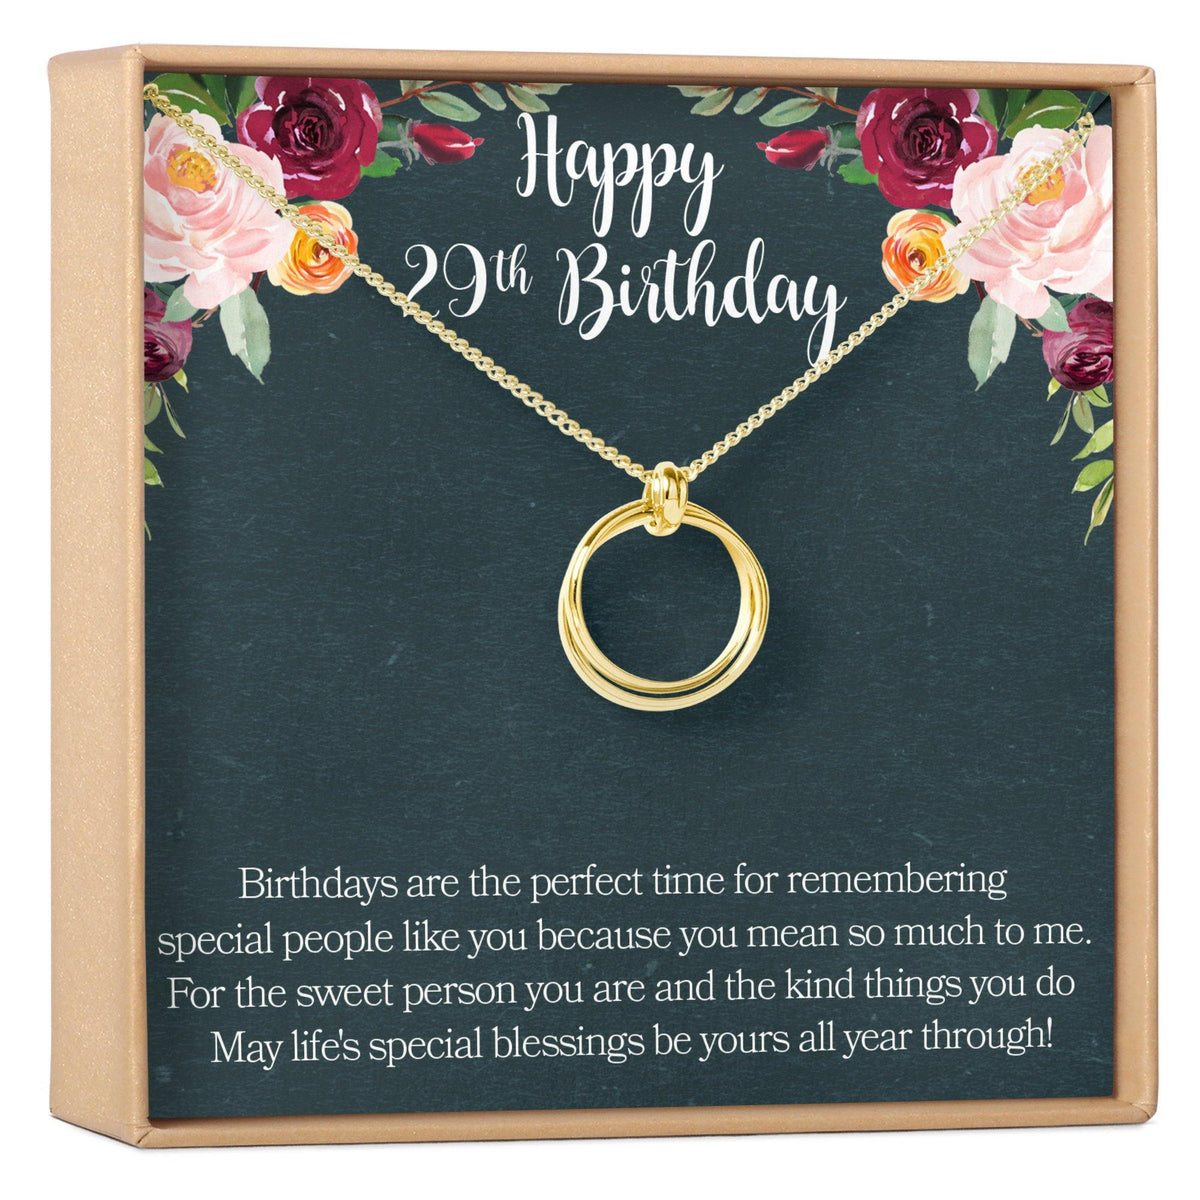 29th Birthday Necklace - Dear Ava, Jewelry / Necklaces / Pendants